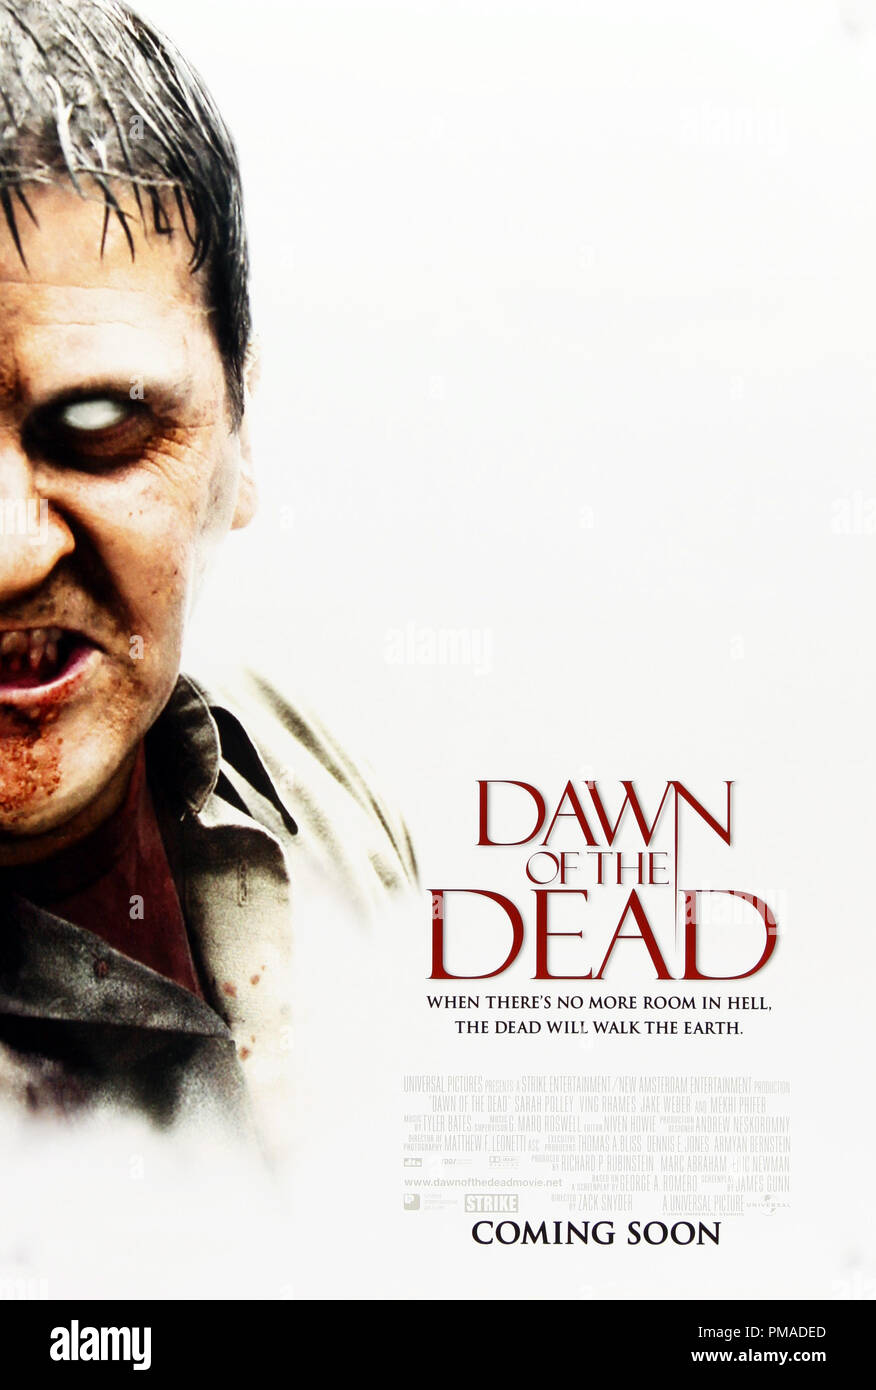 Dawn of the Dead" - US Poster 2004 Universal Studios File Reference # 32509  109THA Stock Photo - Alamy